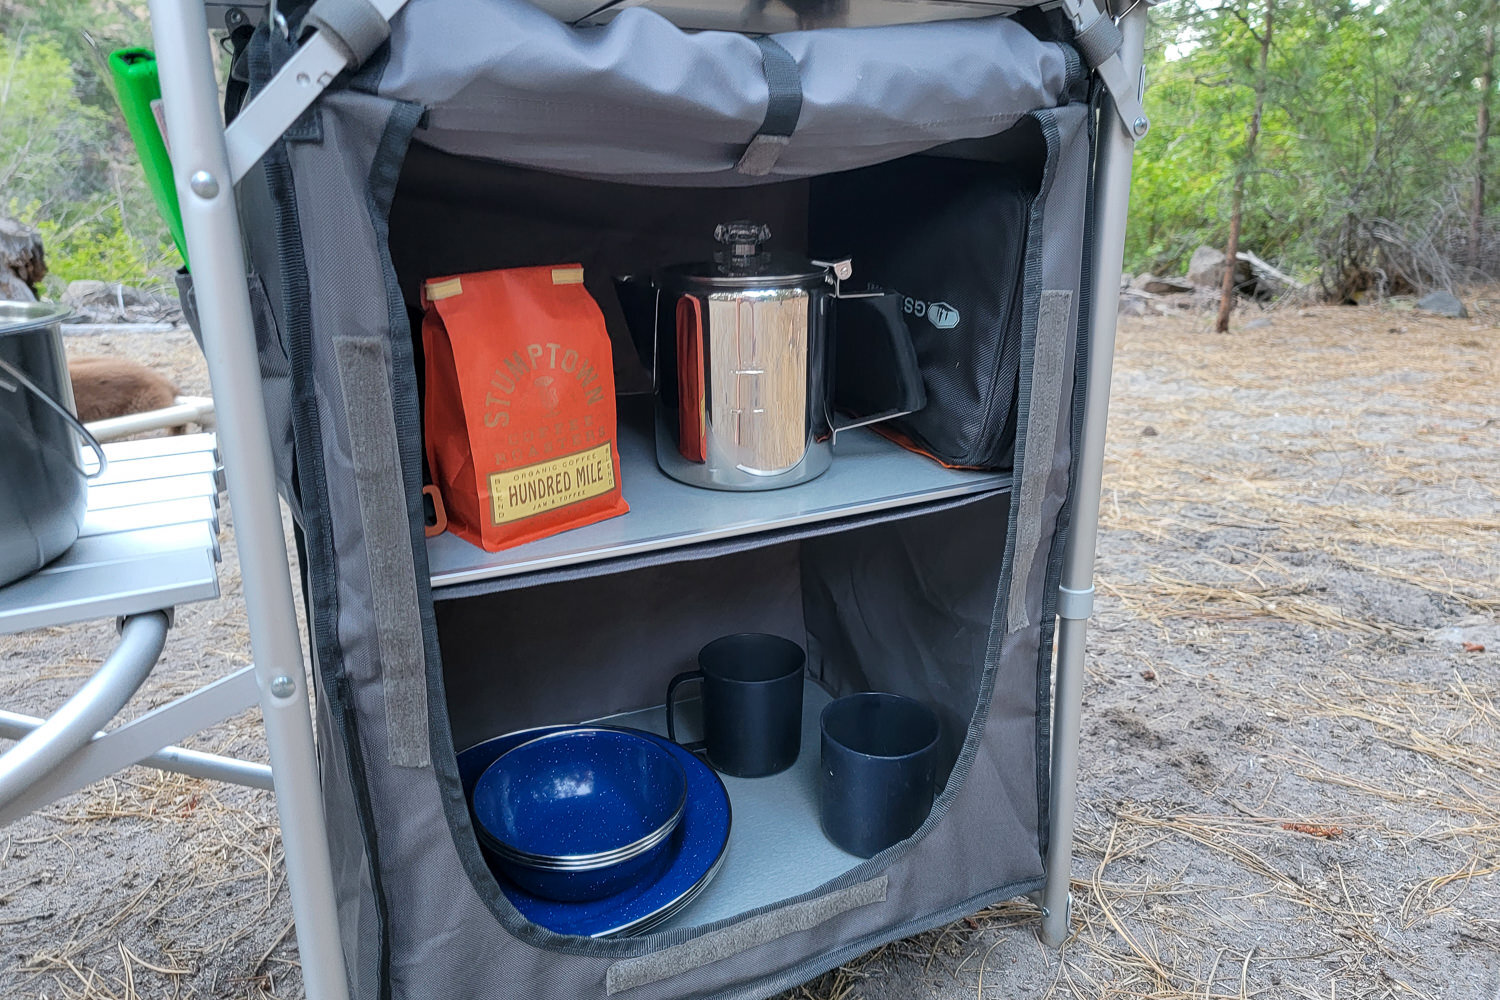 The Mountain Summit Gear Deluxe Roll Top Kitchen has a removeable storage compartment with shelves